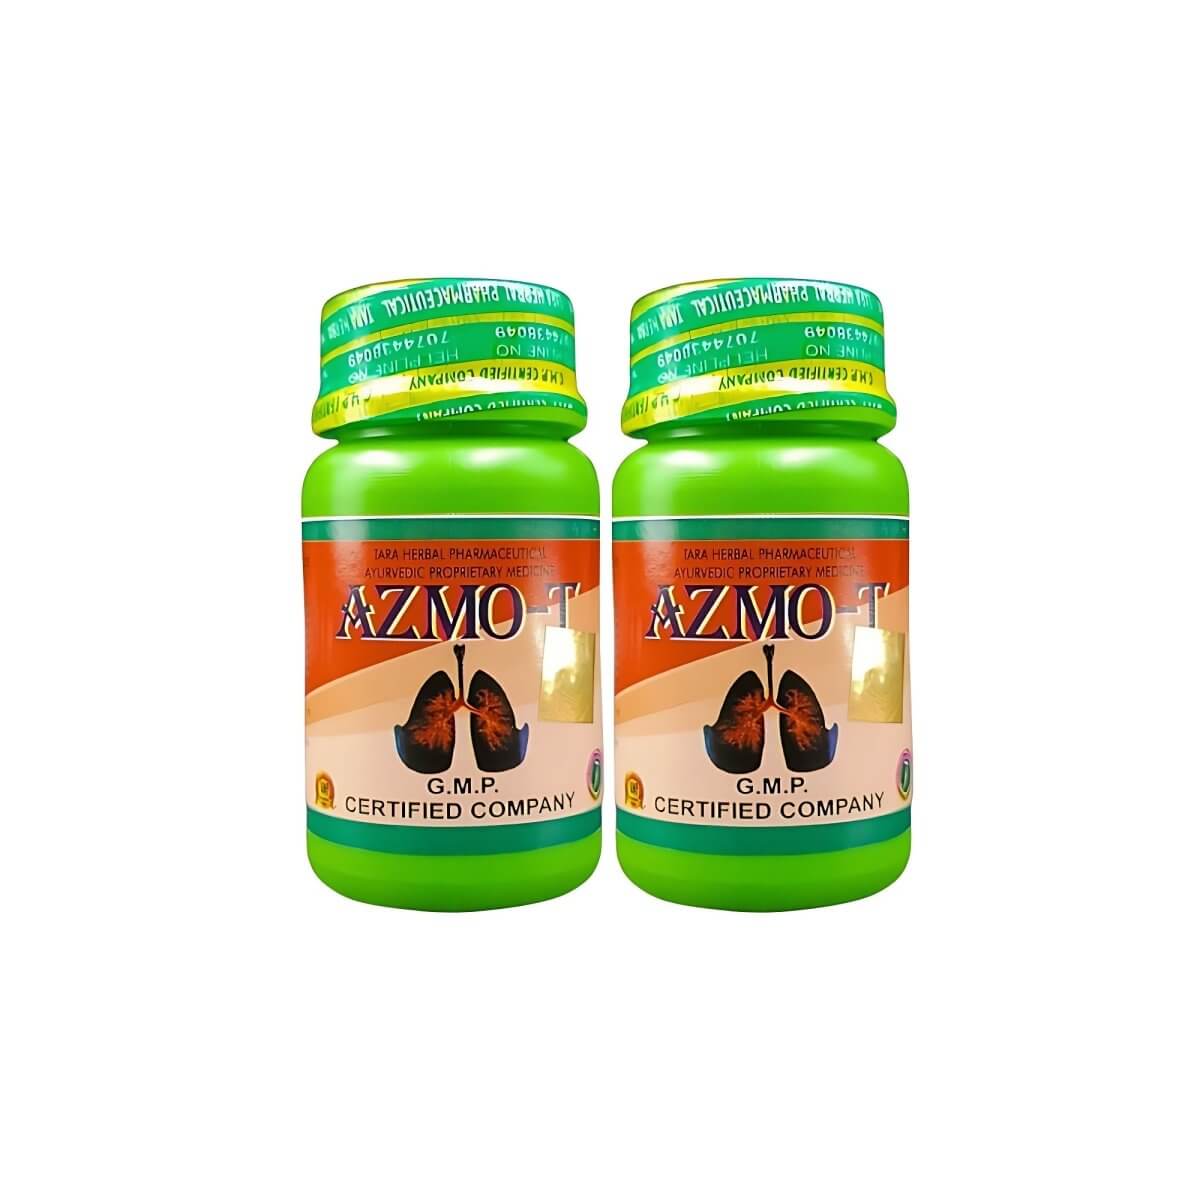 AZMO - T 50 CAPSULE (PACK OF 2)